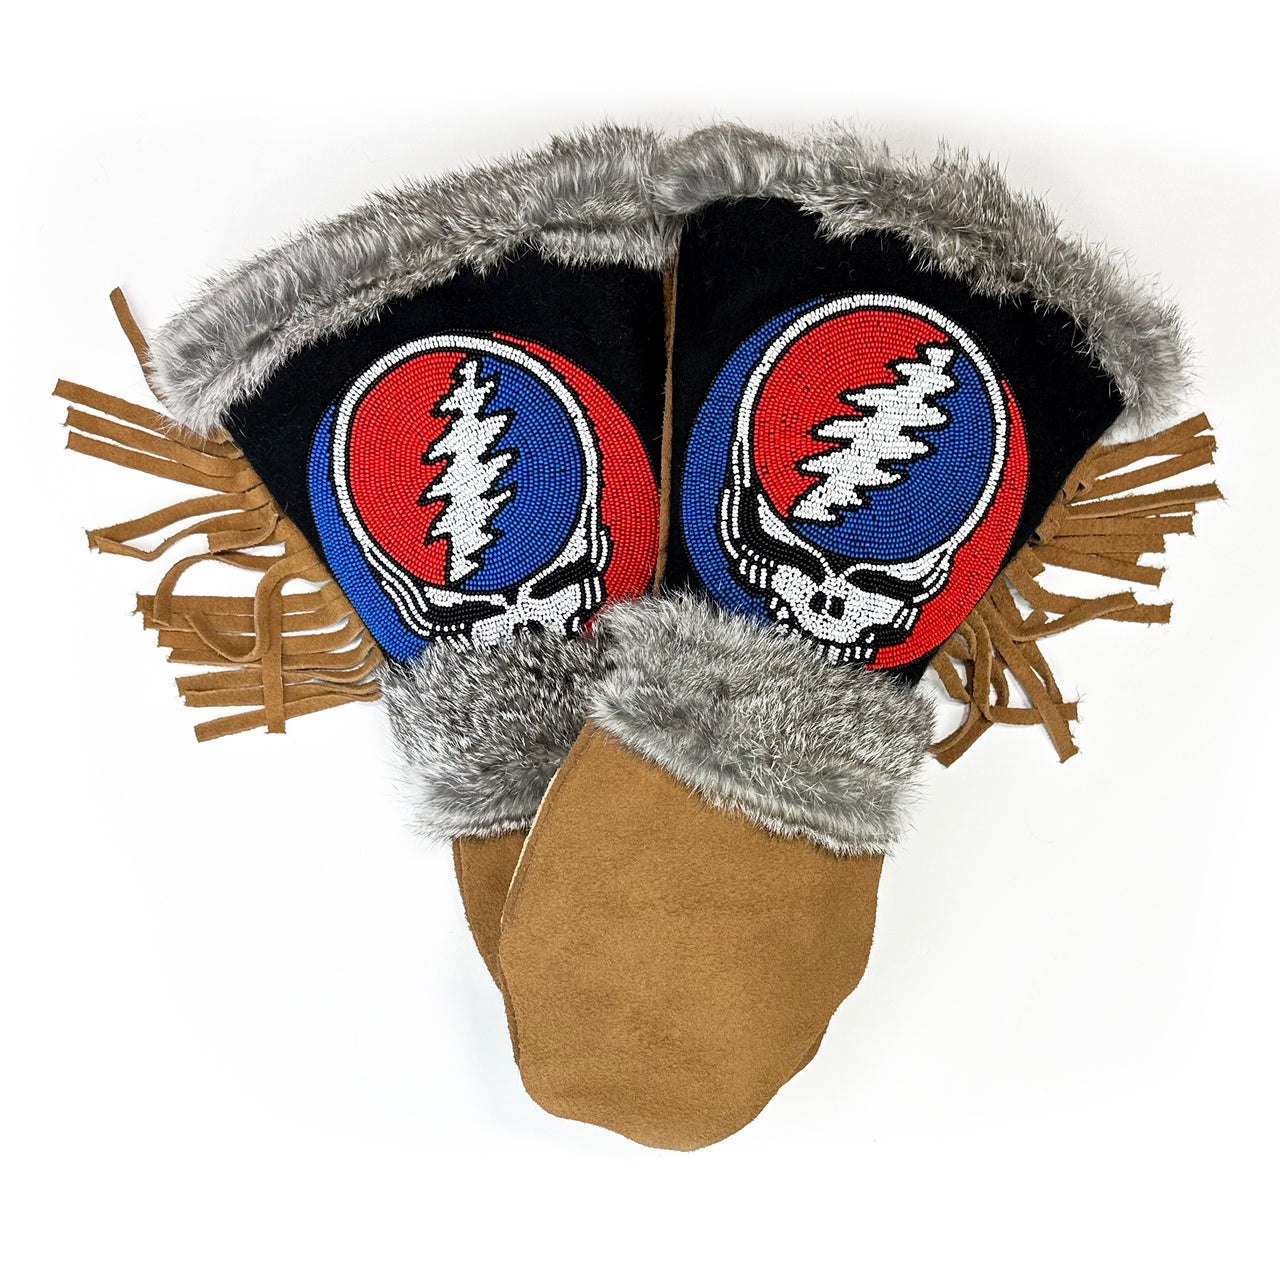 Limited Co-Lab: Steal Your Face (Brown)